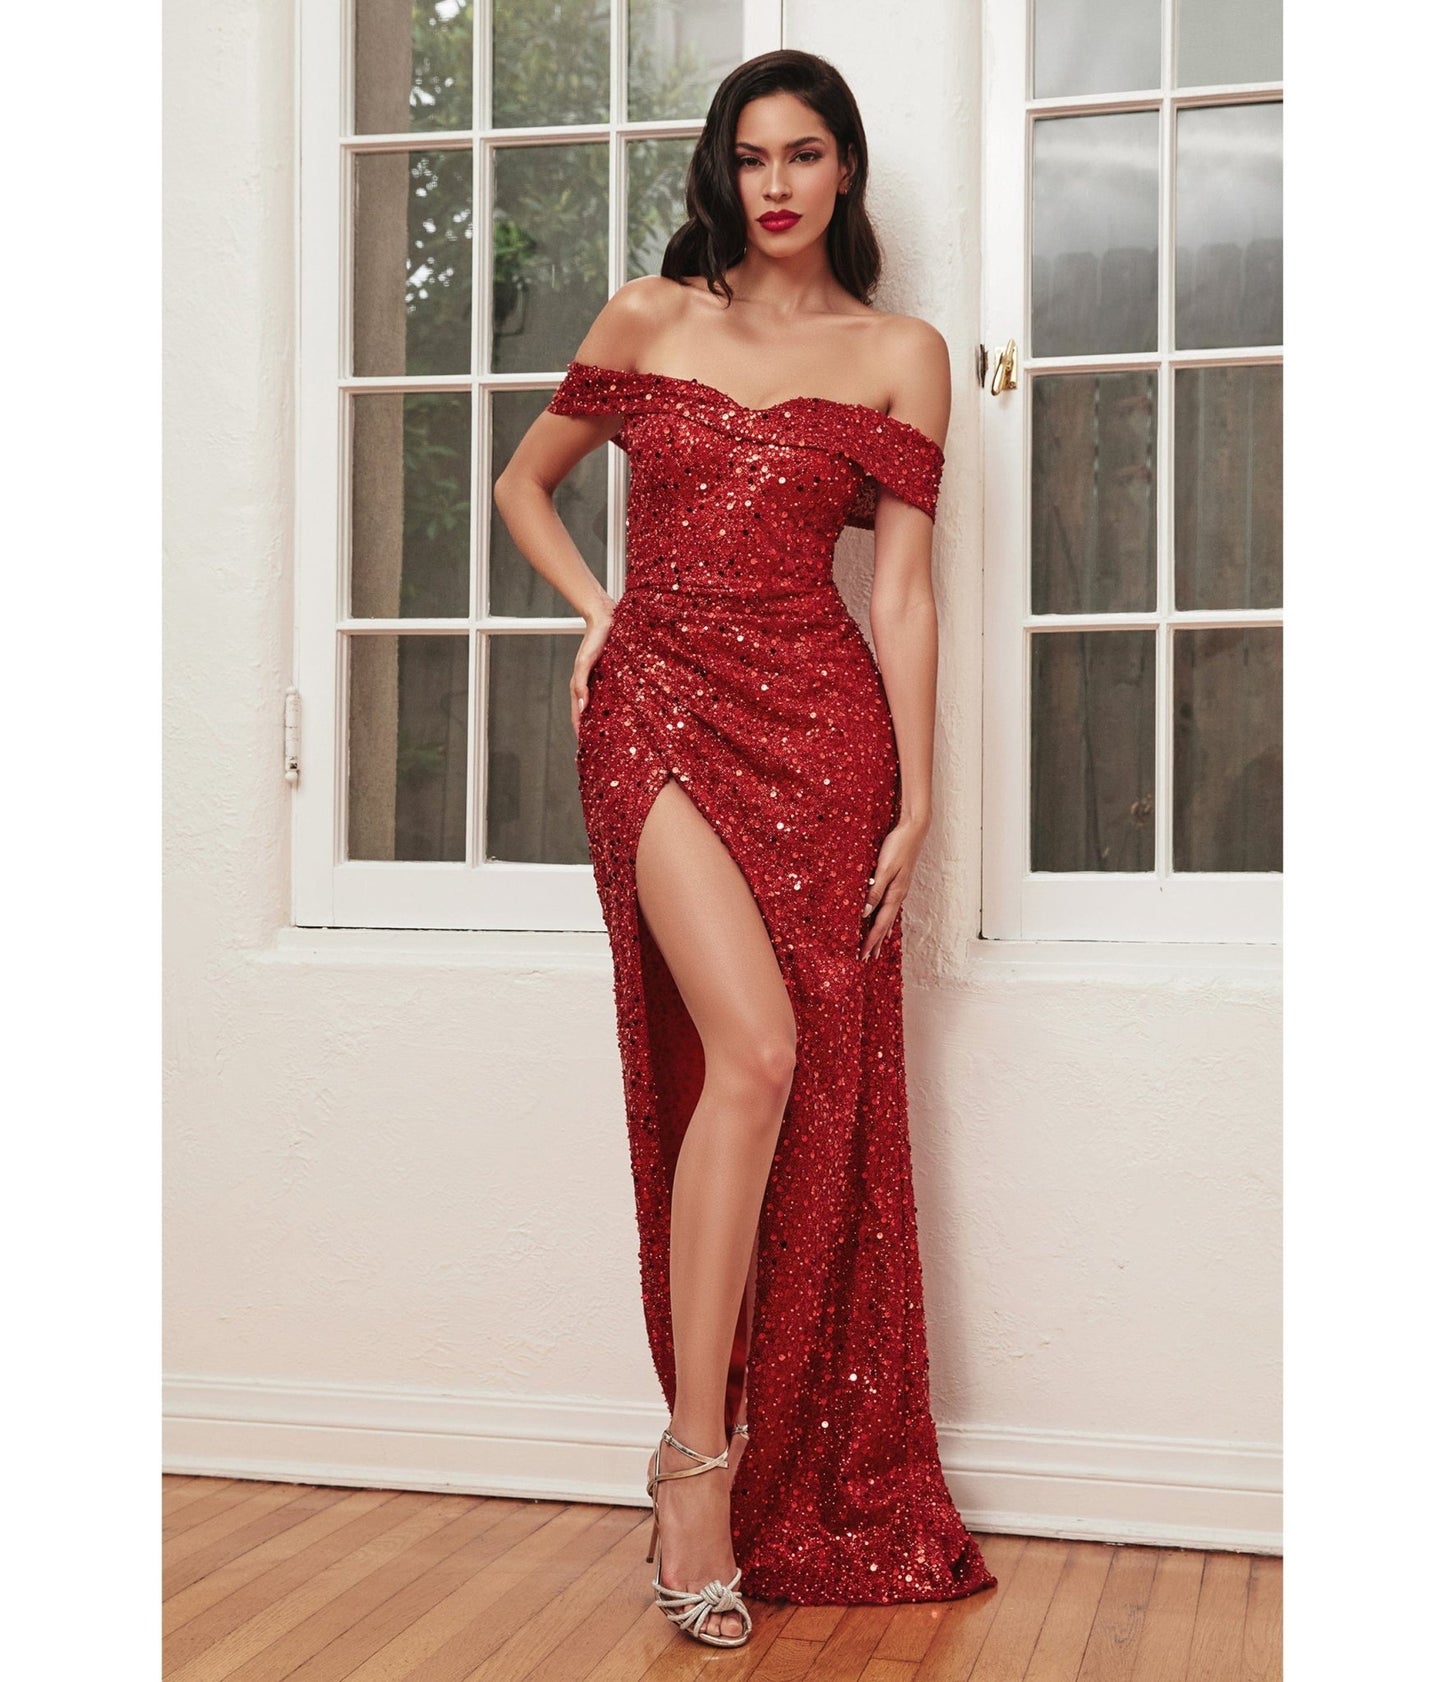 Retro & Vintage Glamorous Red Off Shoulder Sequin Prom Gown